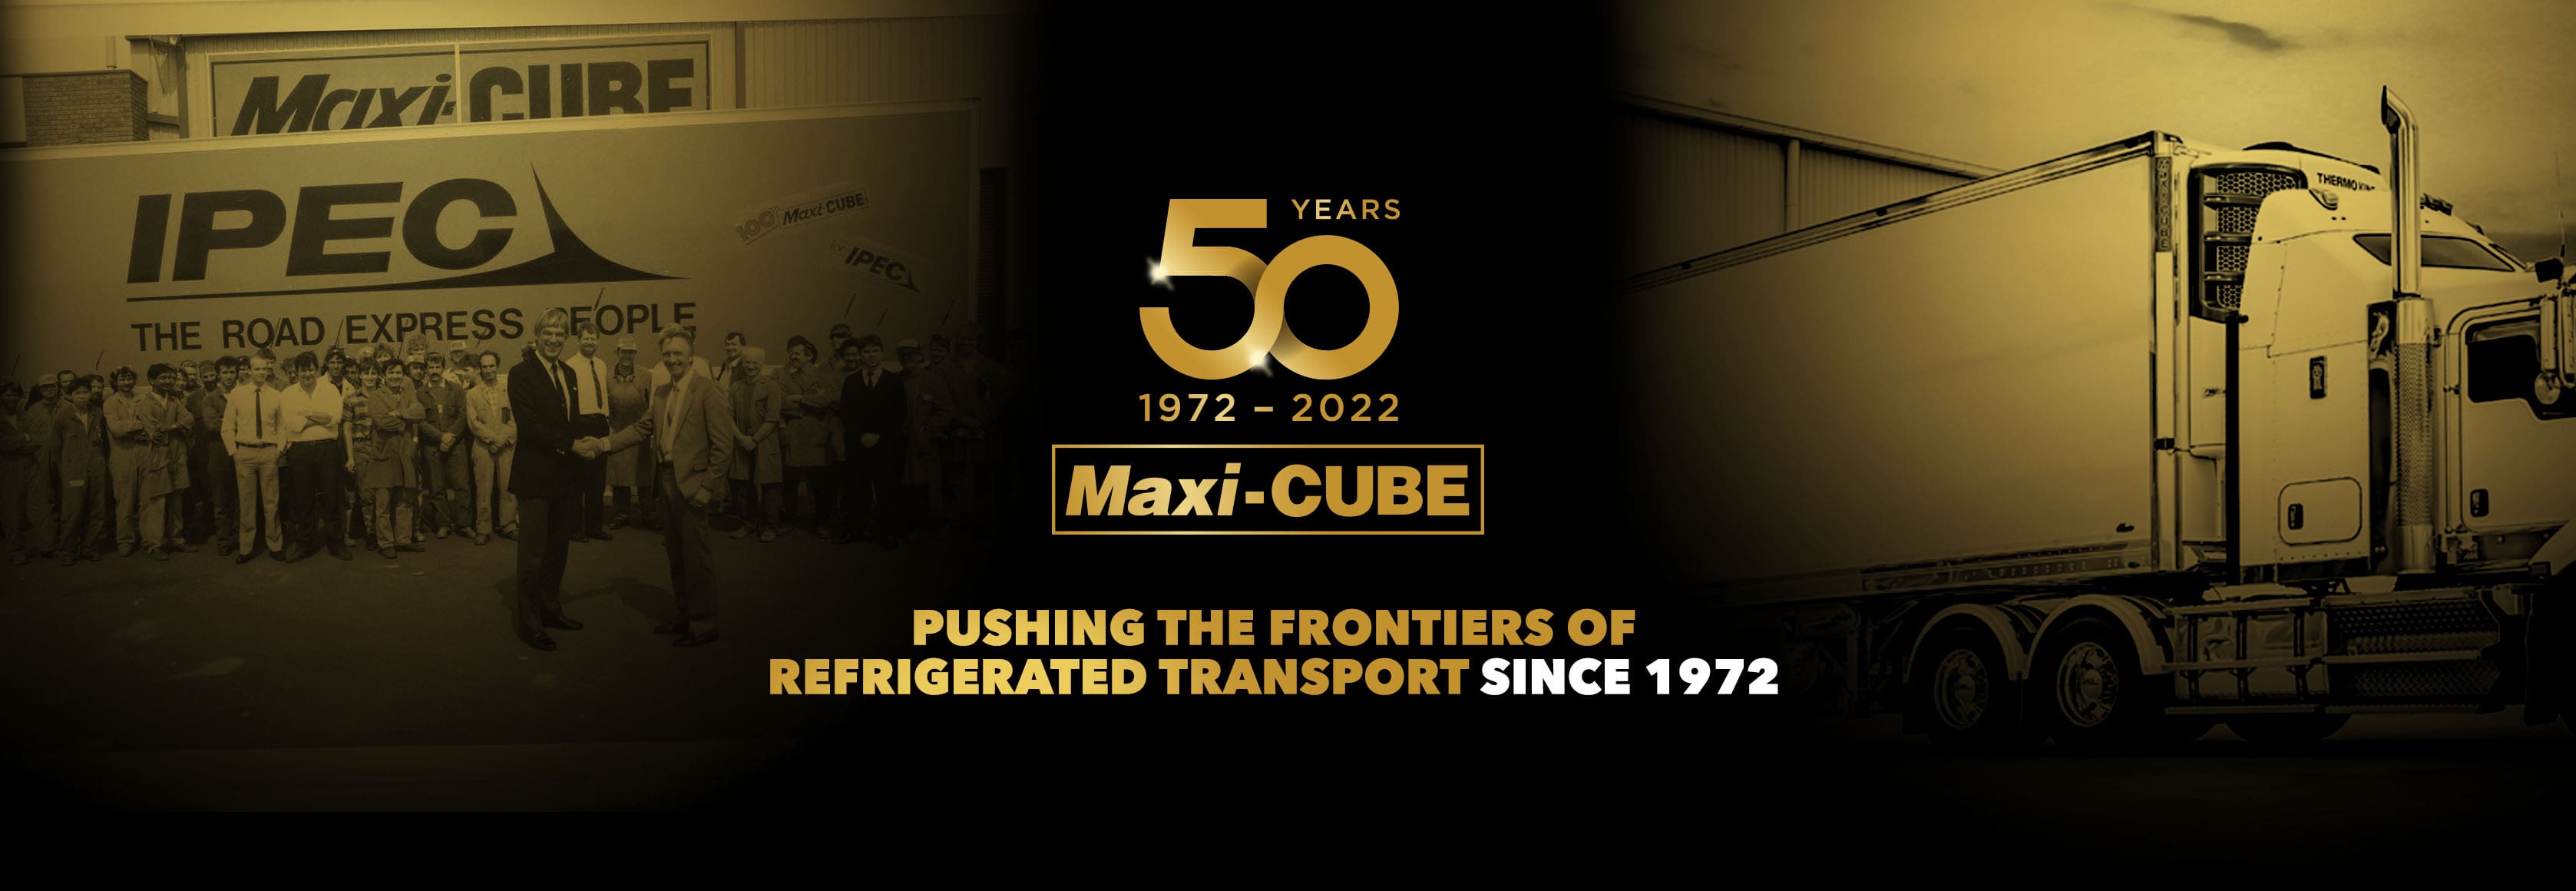 50 years of Maxi-CUBE trailer vans